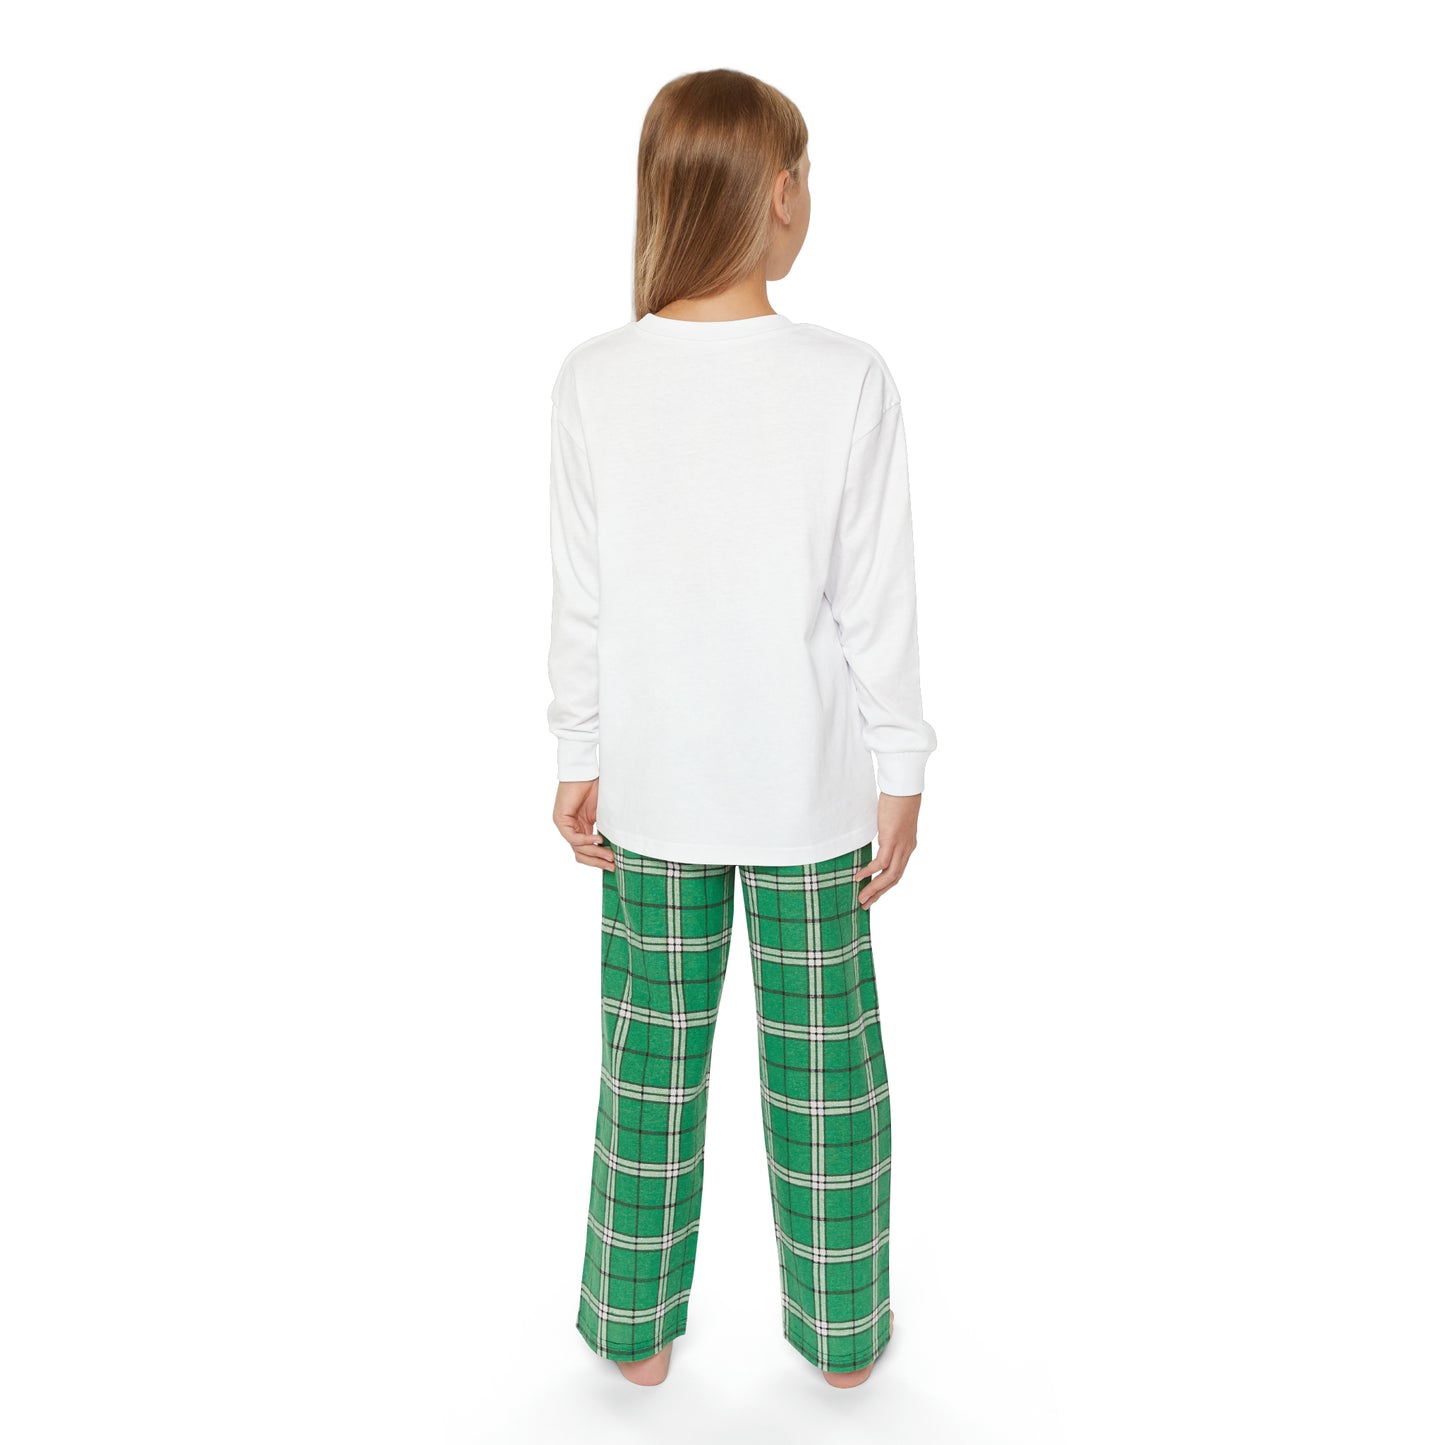 In Christ I Am Flawlessly & Purposefully Created Youth Christian Long Sleeve Pajama Set Printify